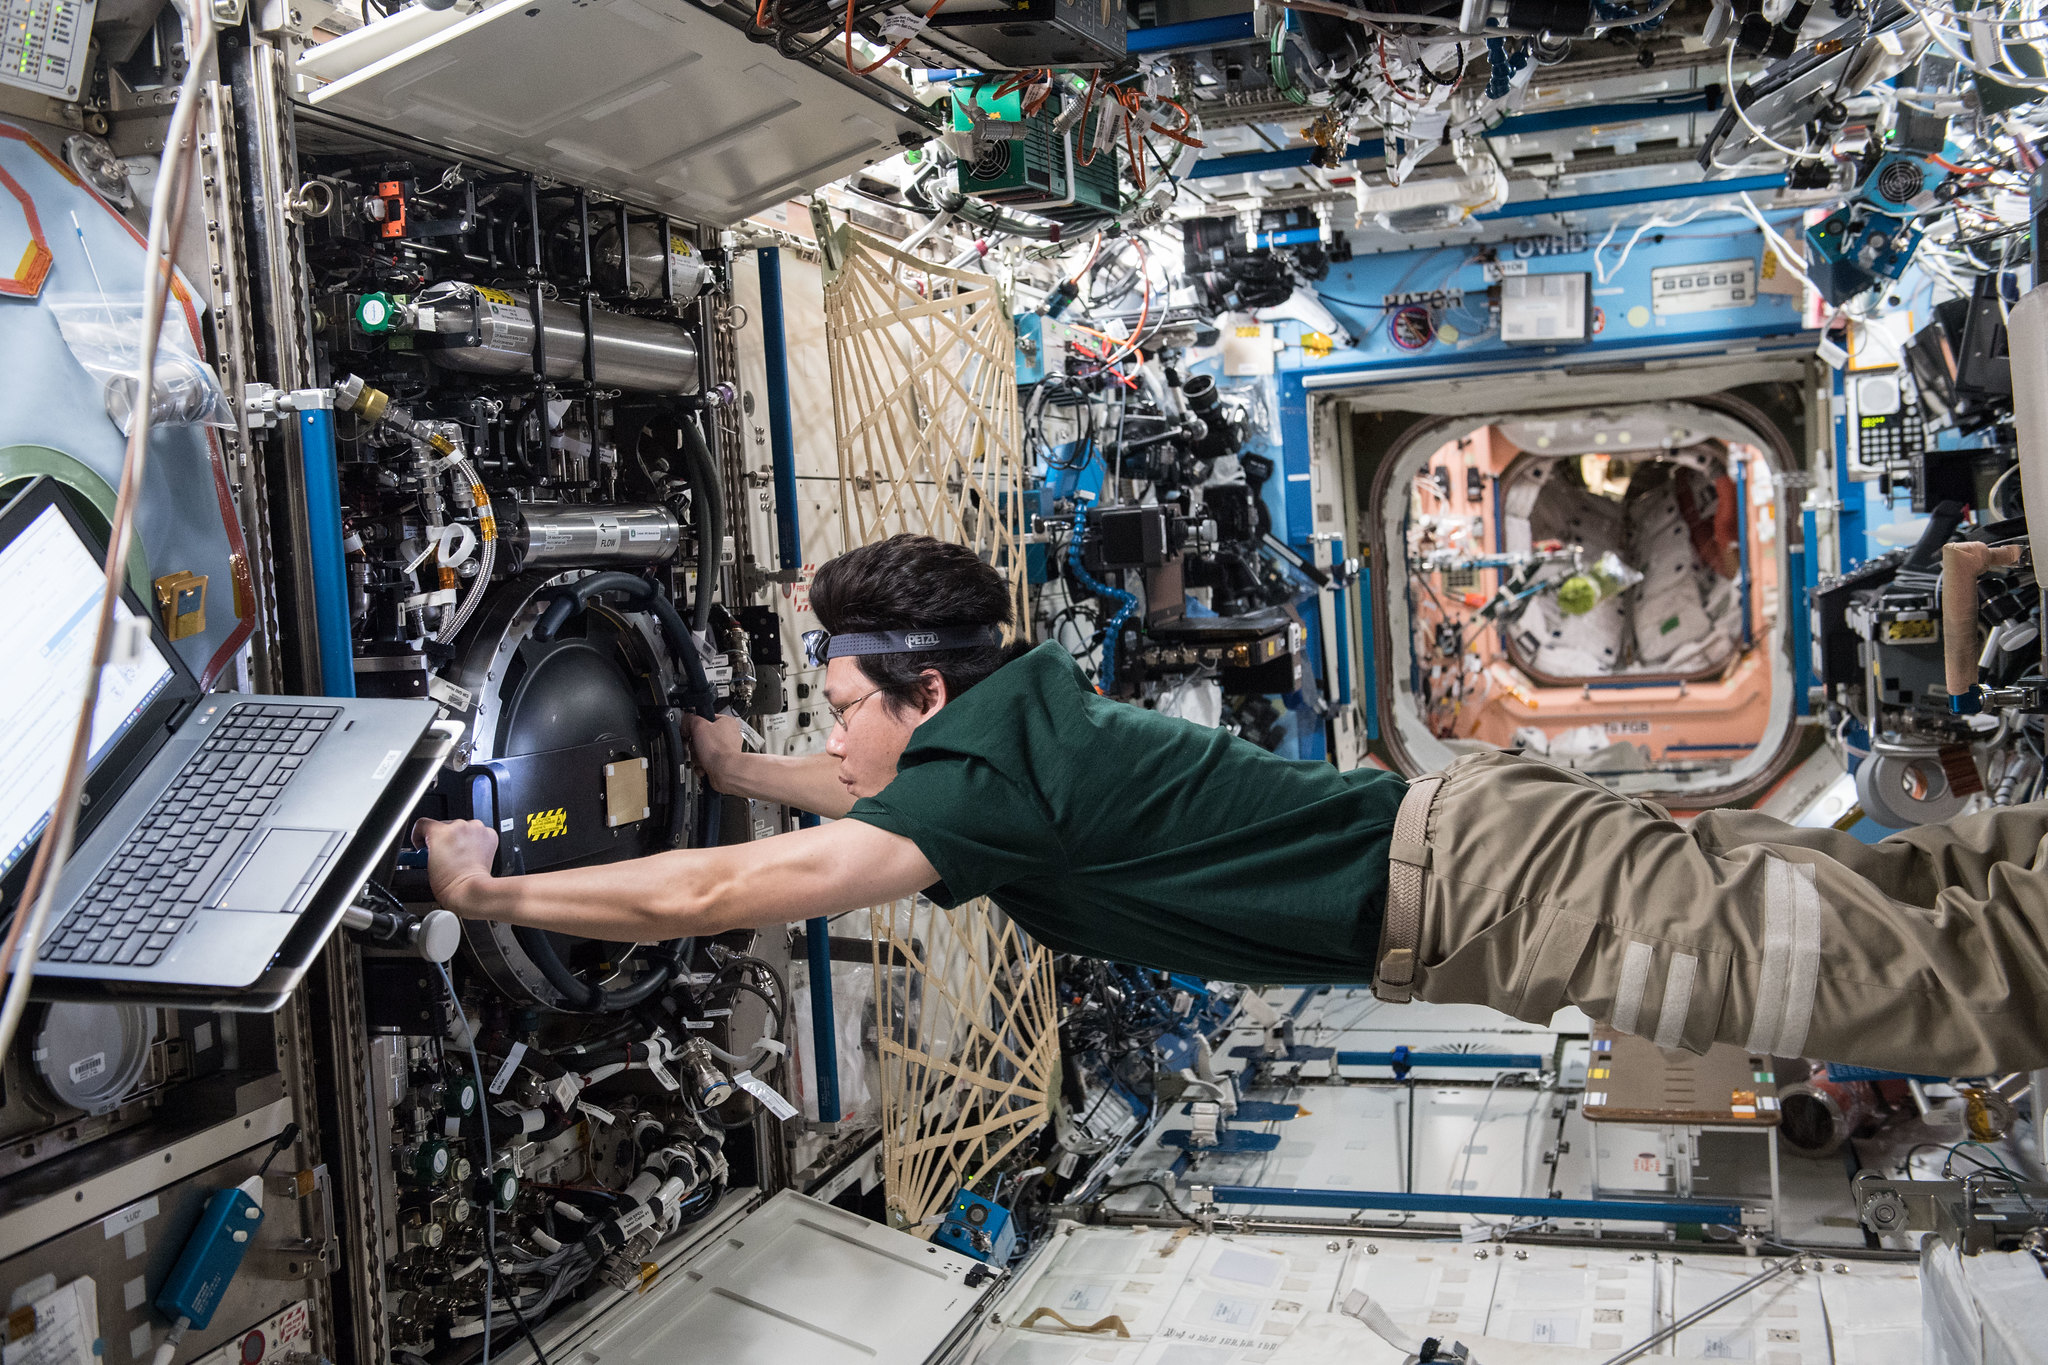 Floating astronaut examines camera inside the space station.